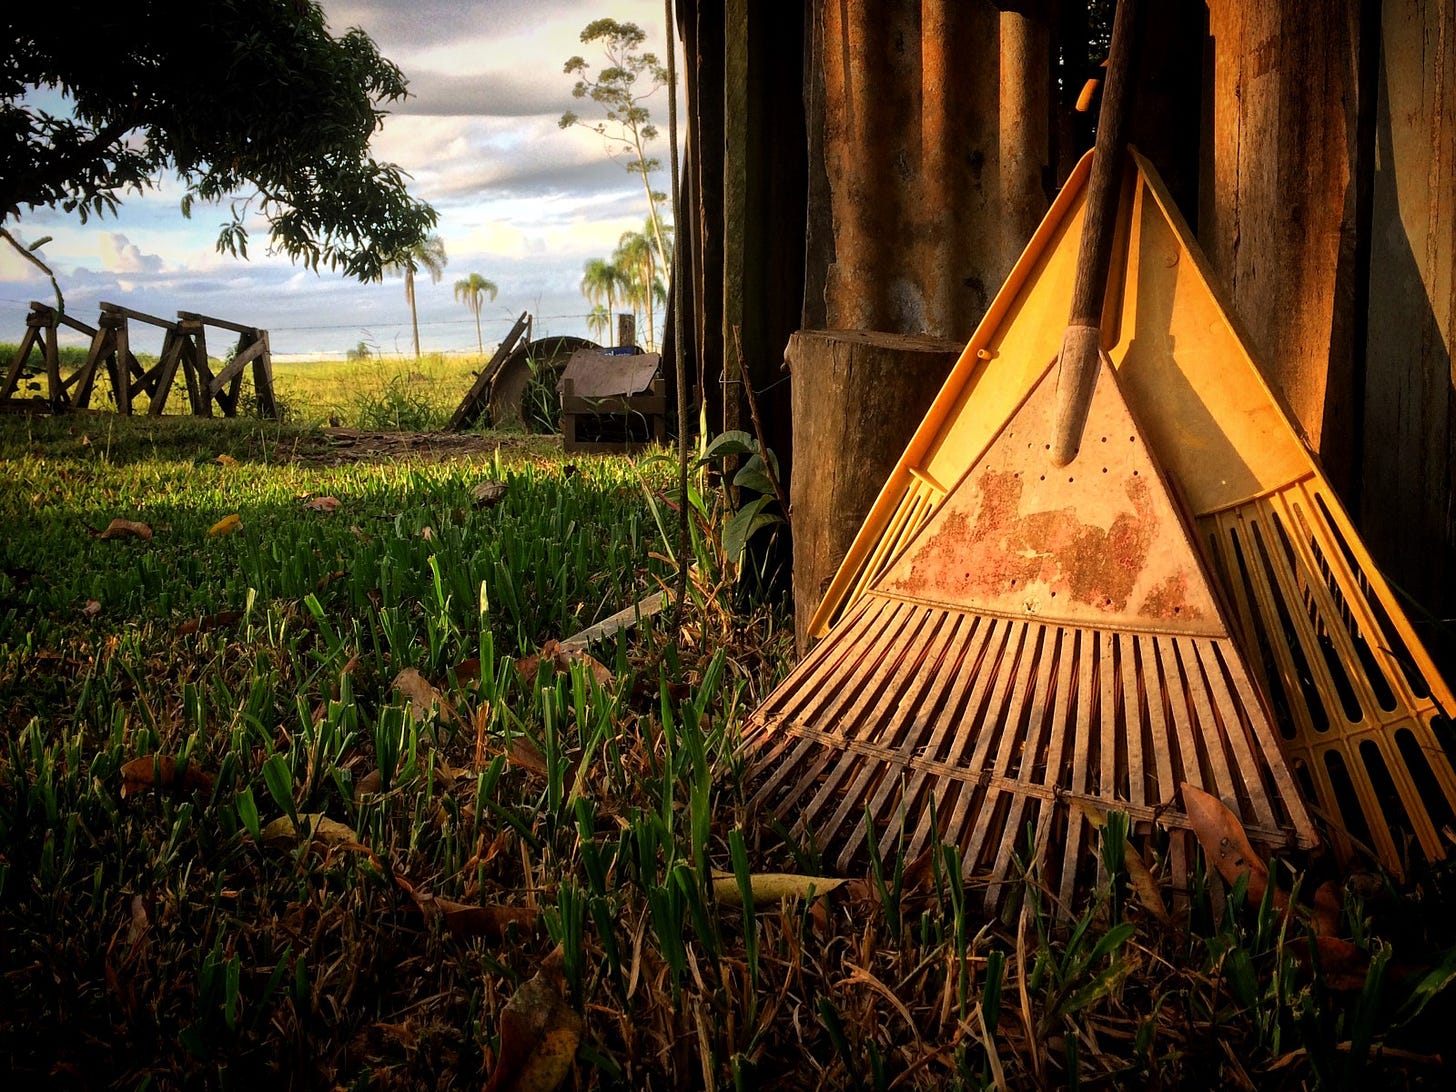 Rustic scene with two rakes leaning against a rustic shed, glowing with golden sunshine.